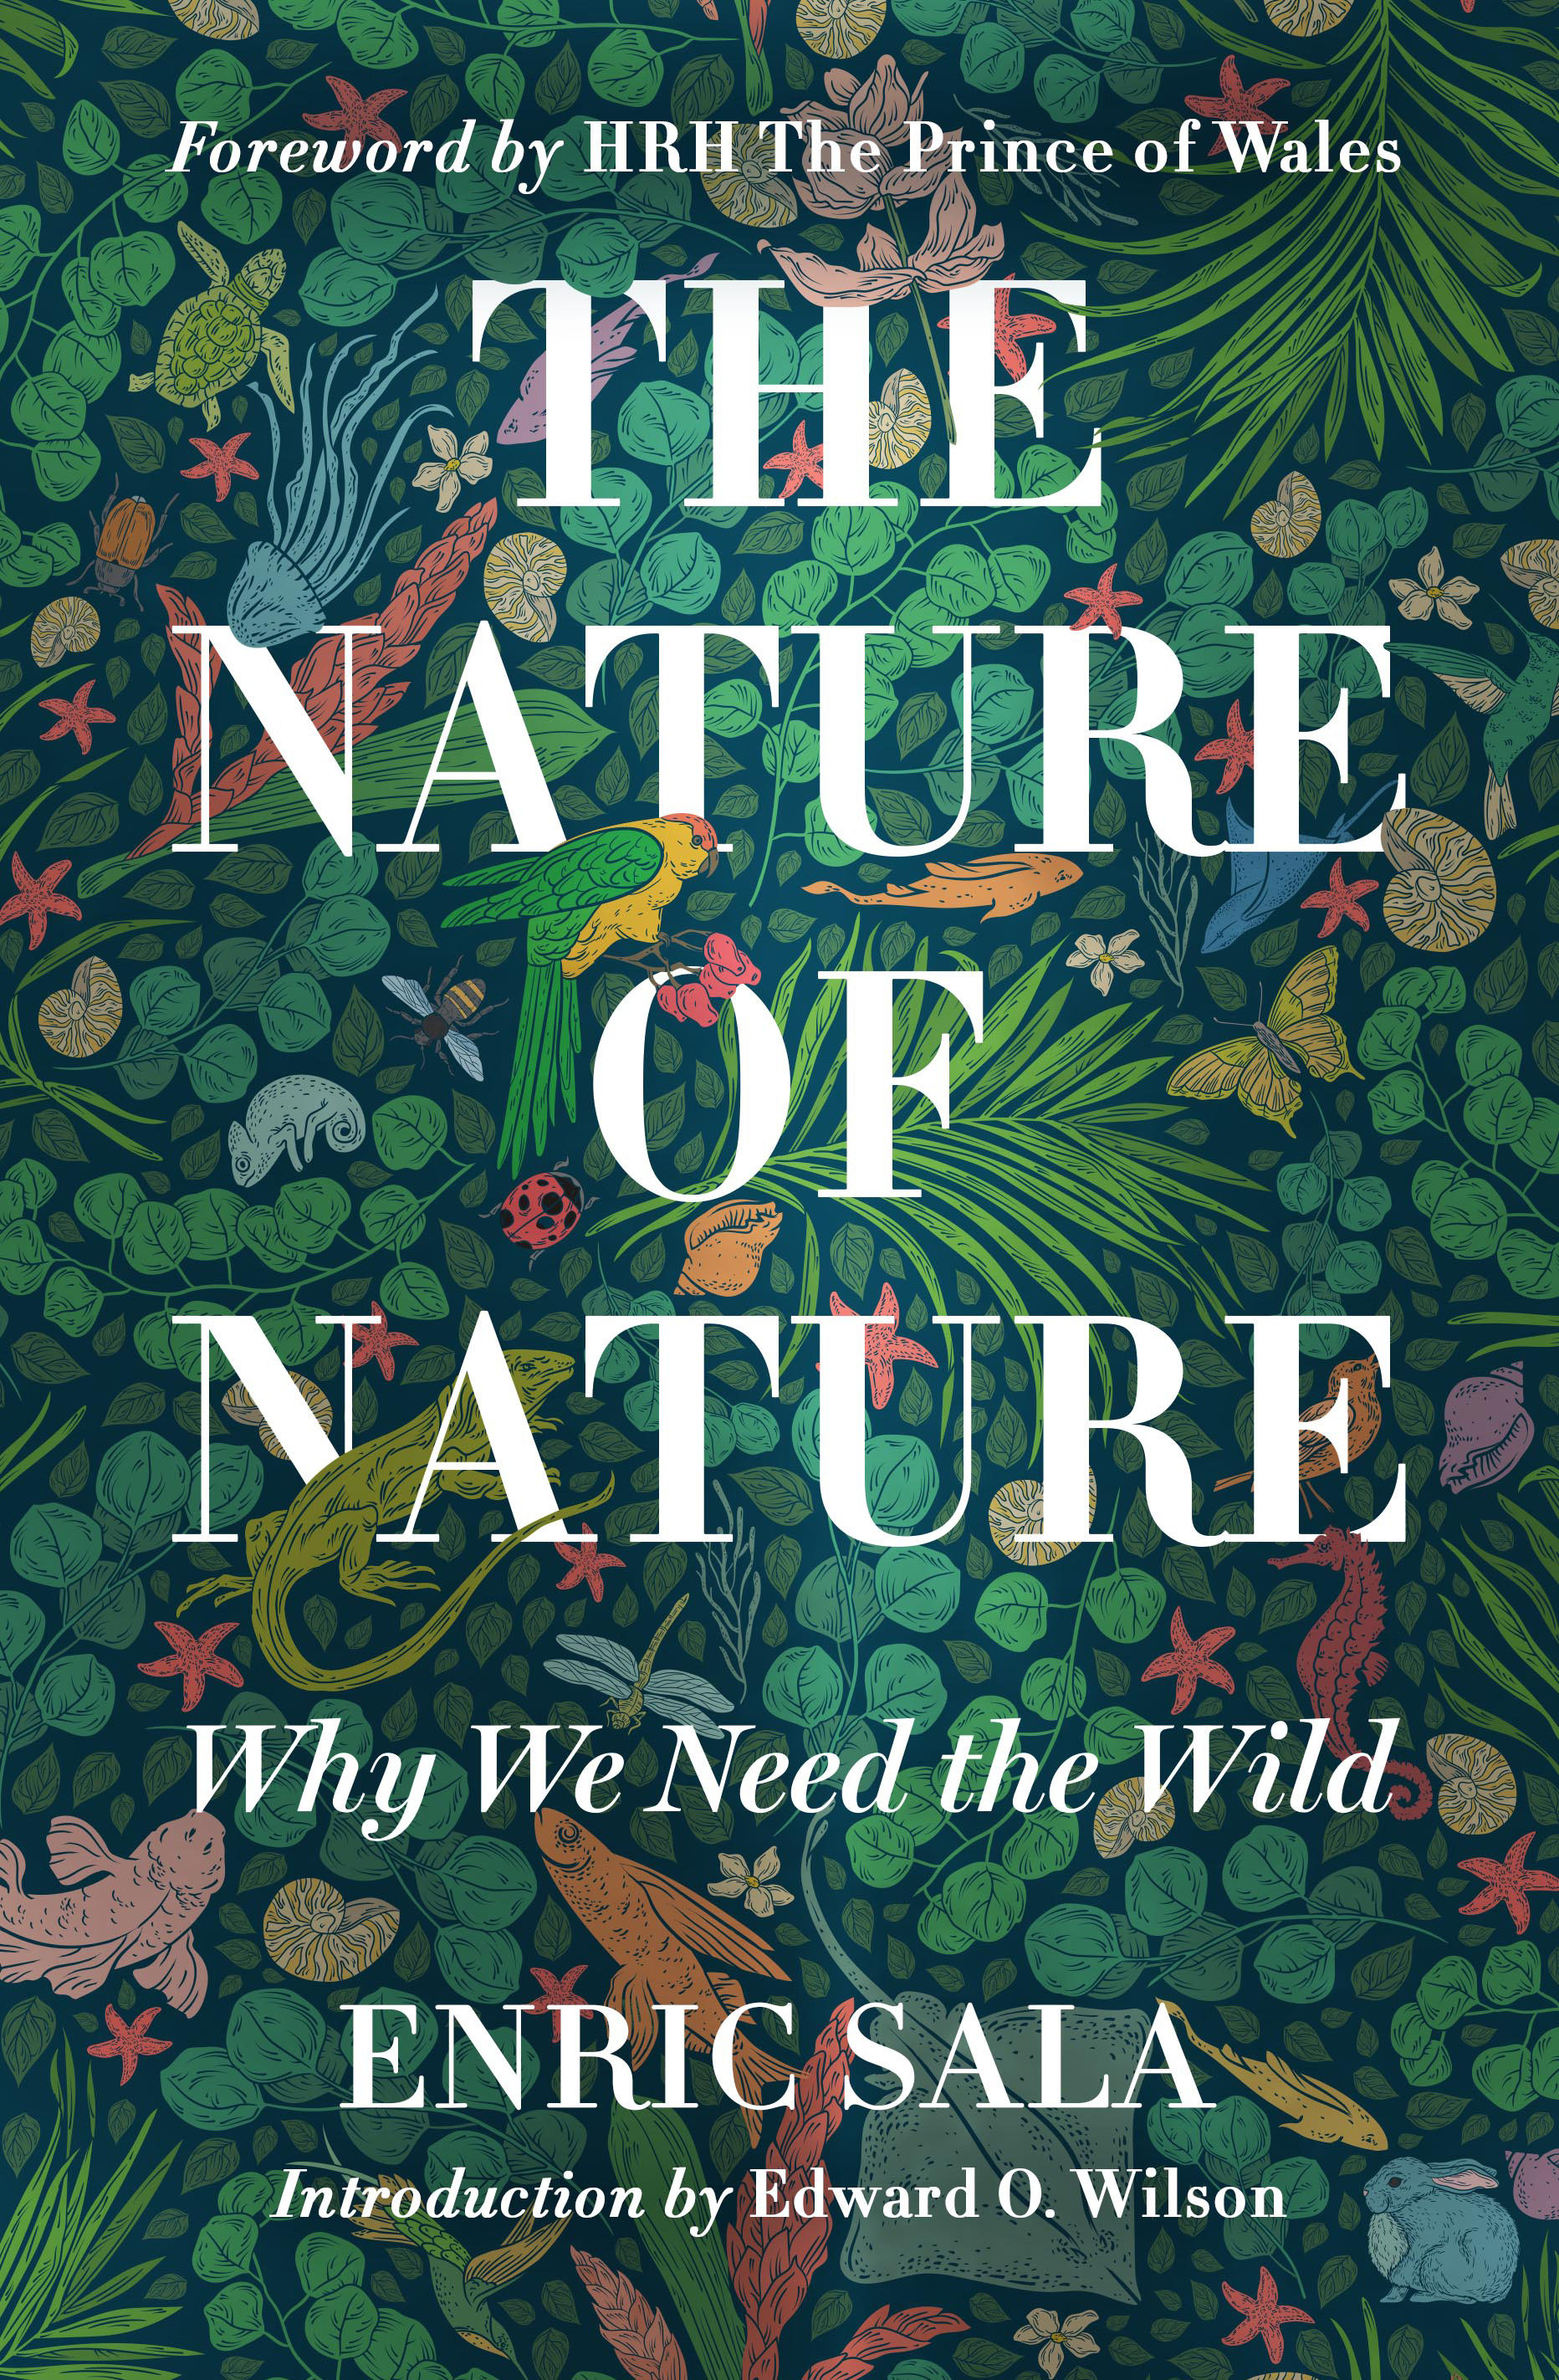 The Nature Of Nature (Hardcover Book)